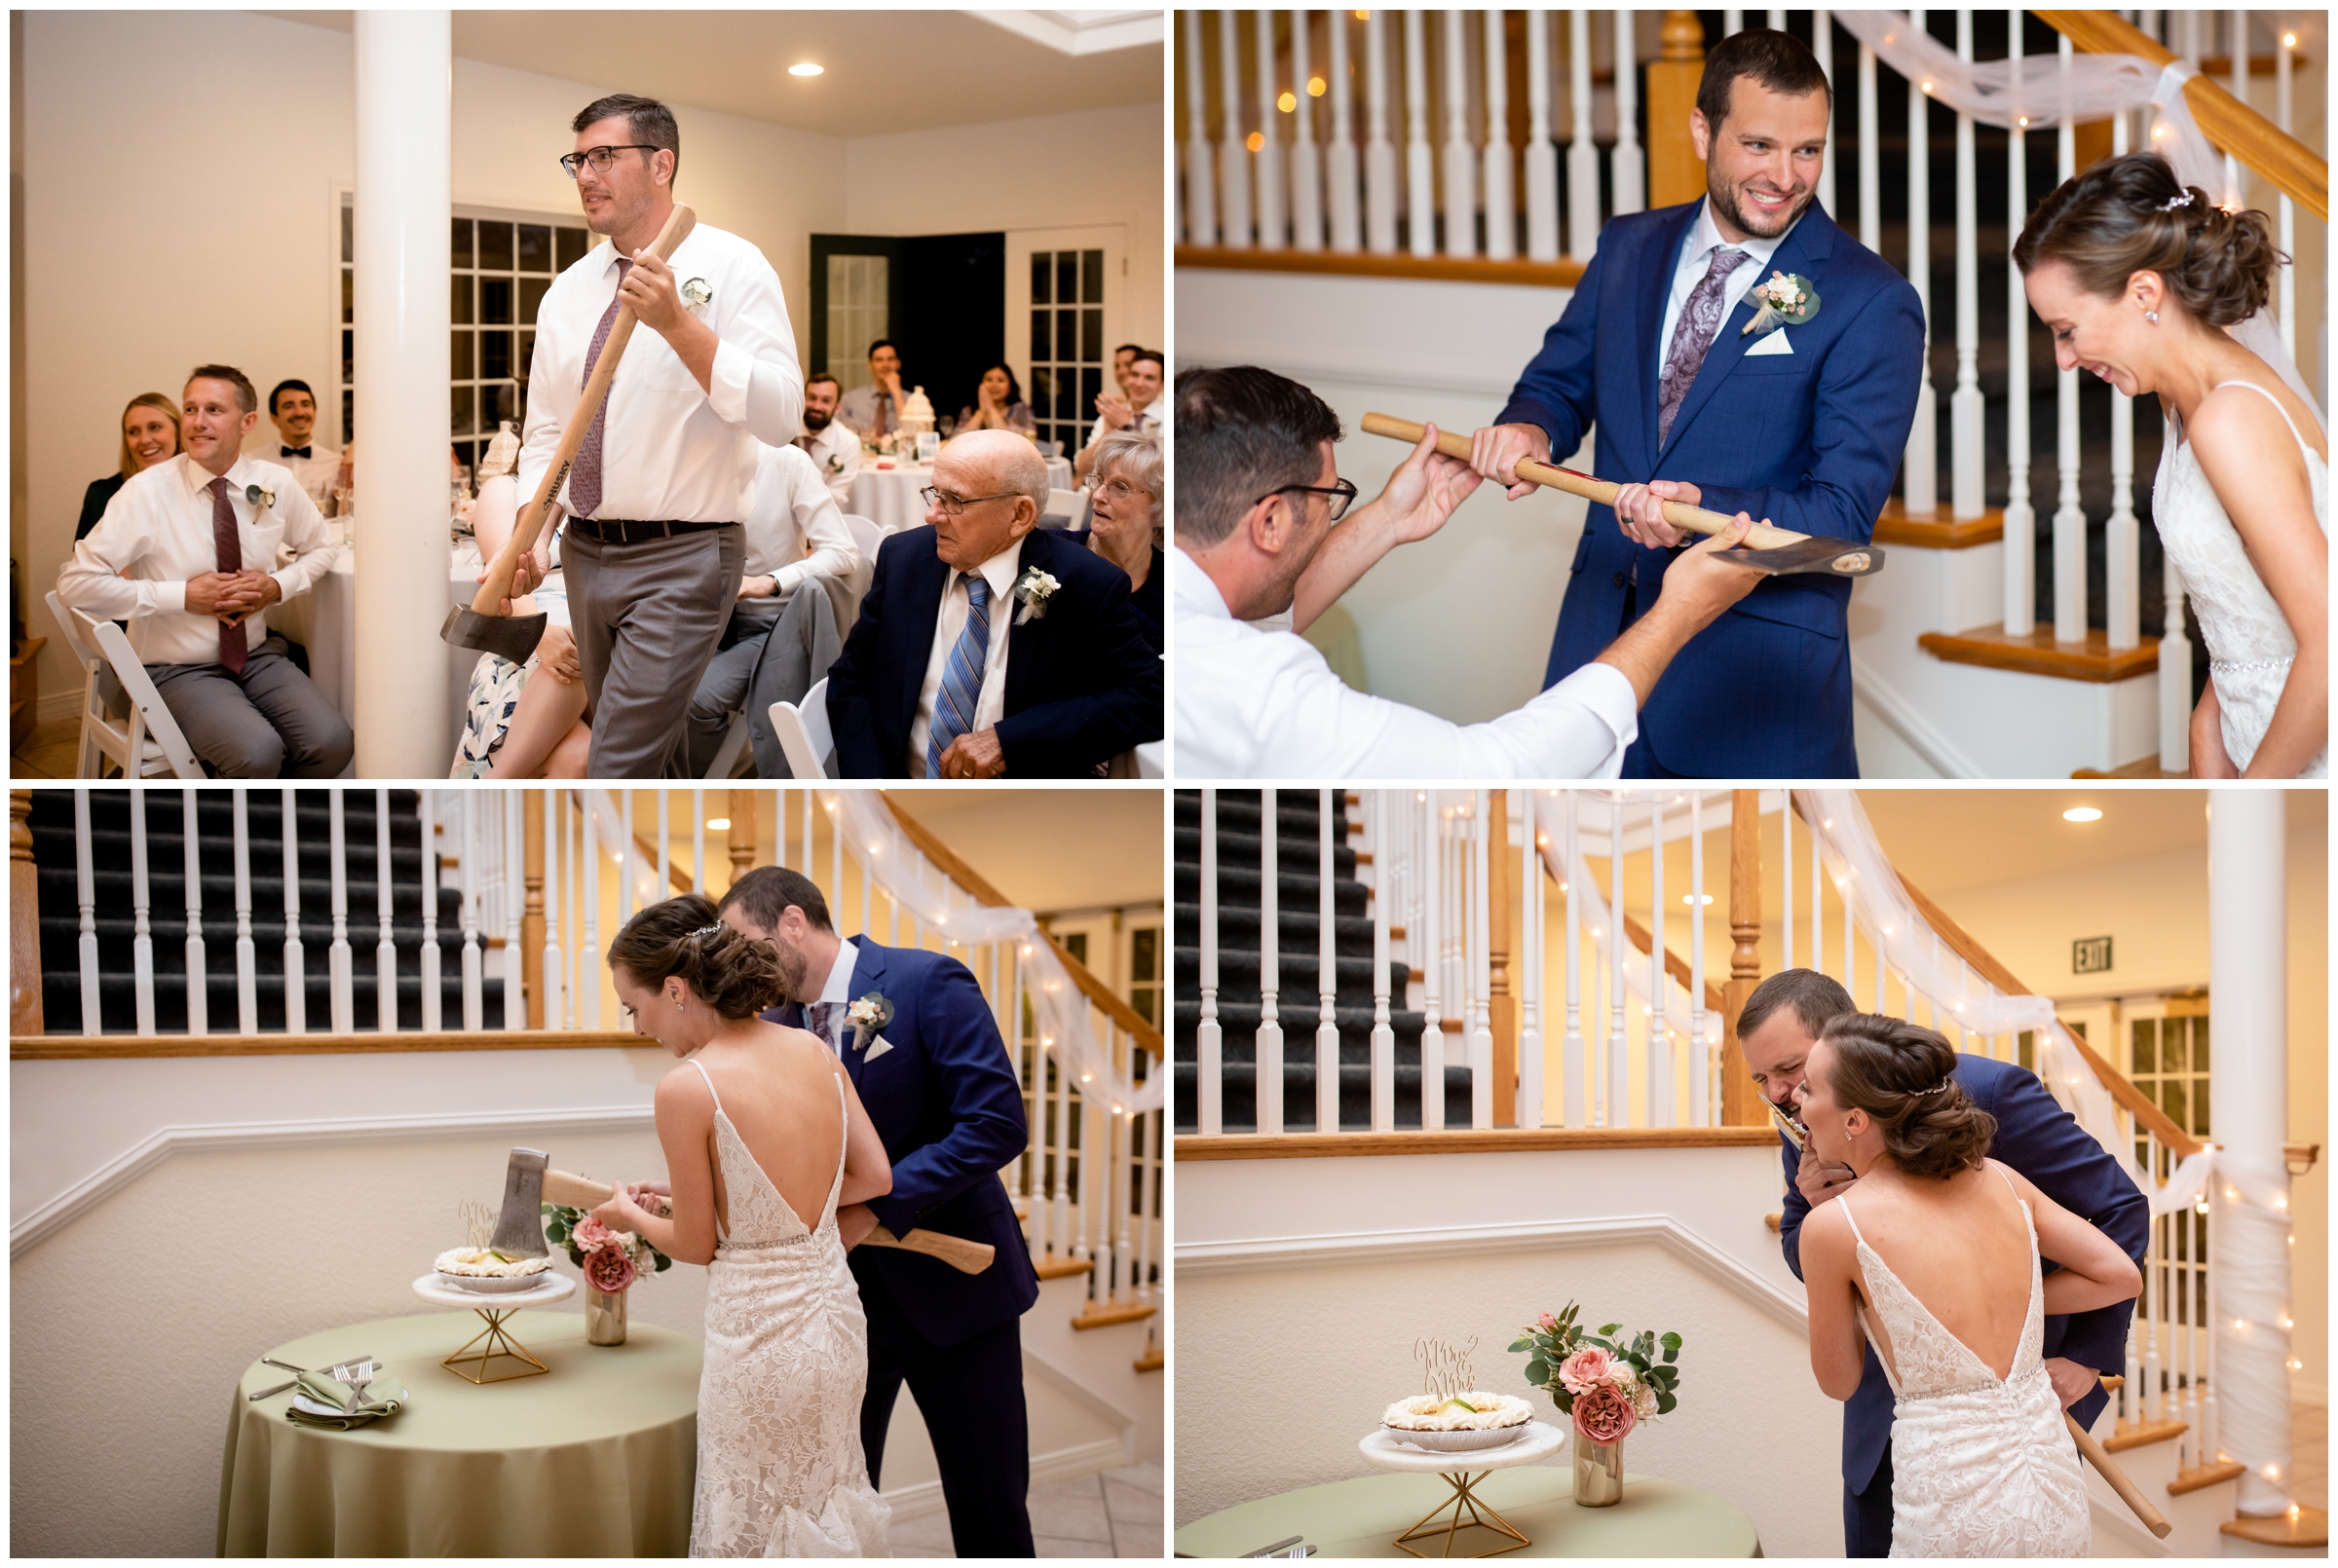 couple cutting wedding cake with an ax 